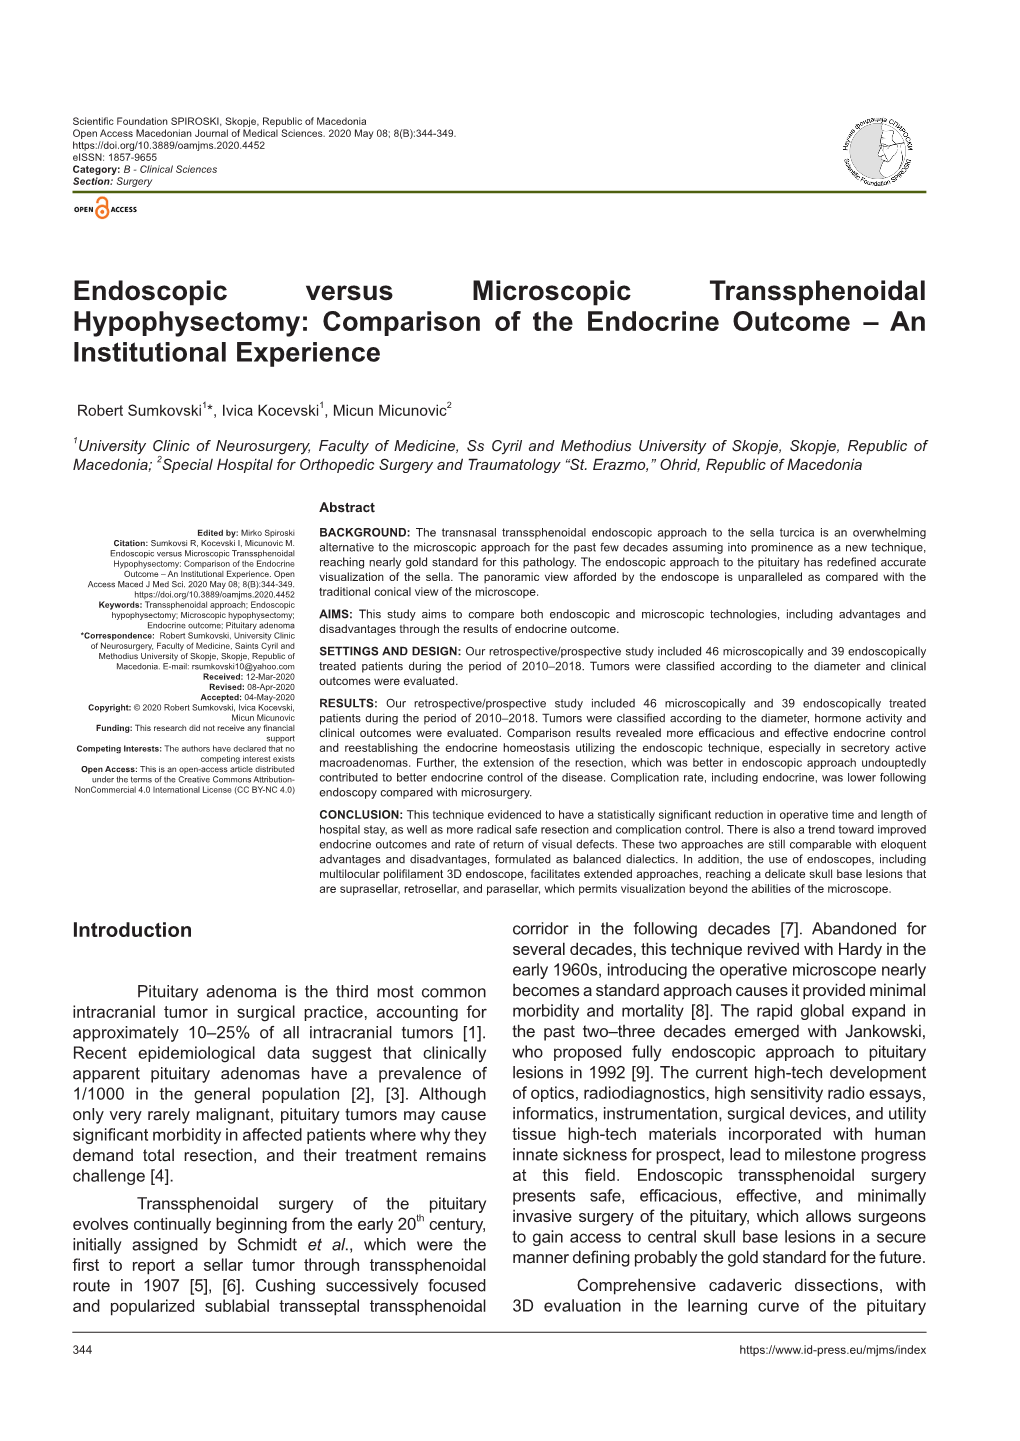 Endoscopic Versus Microscopic Transsphenoidal Hypophysectomy: Comparison of the Endocrine Outcome – an Institutional Experience